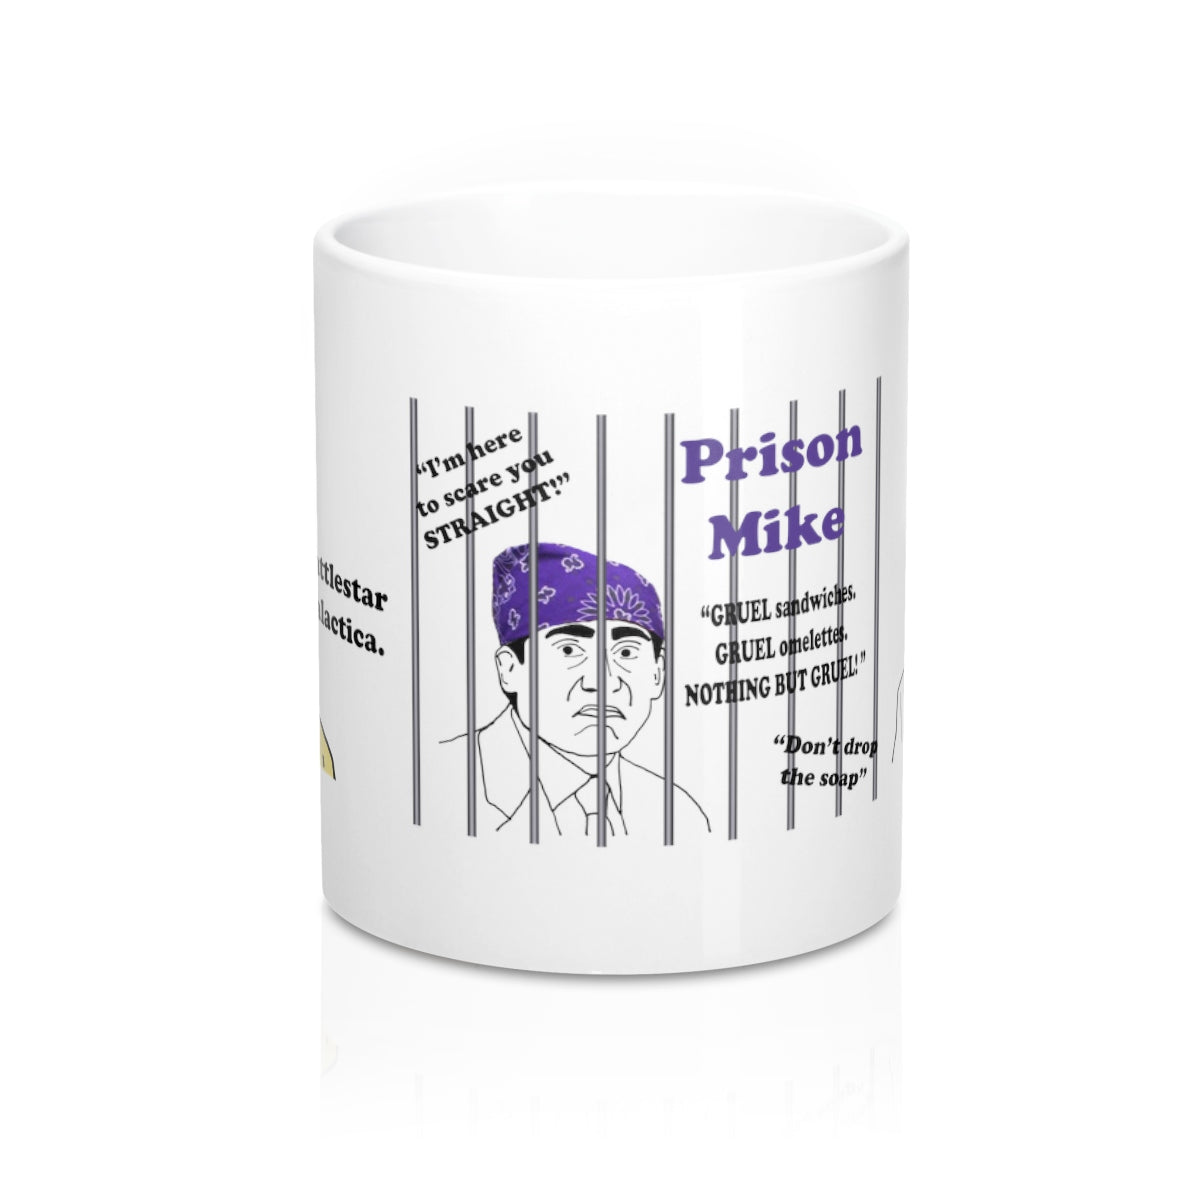 Michael Scott Mug and Paper Company Mug and Coaster Set of 4: The People Person's Paper People, Prison Mike, Dwight, Jim,Fun Run Race